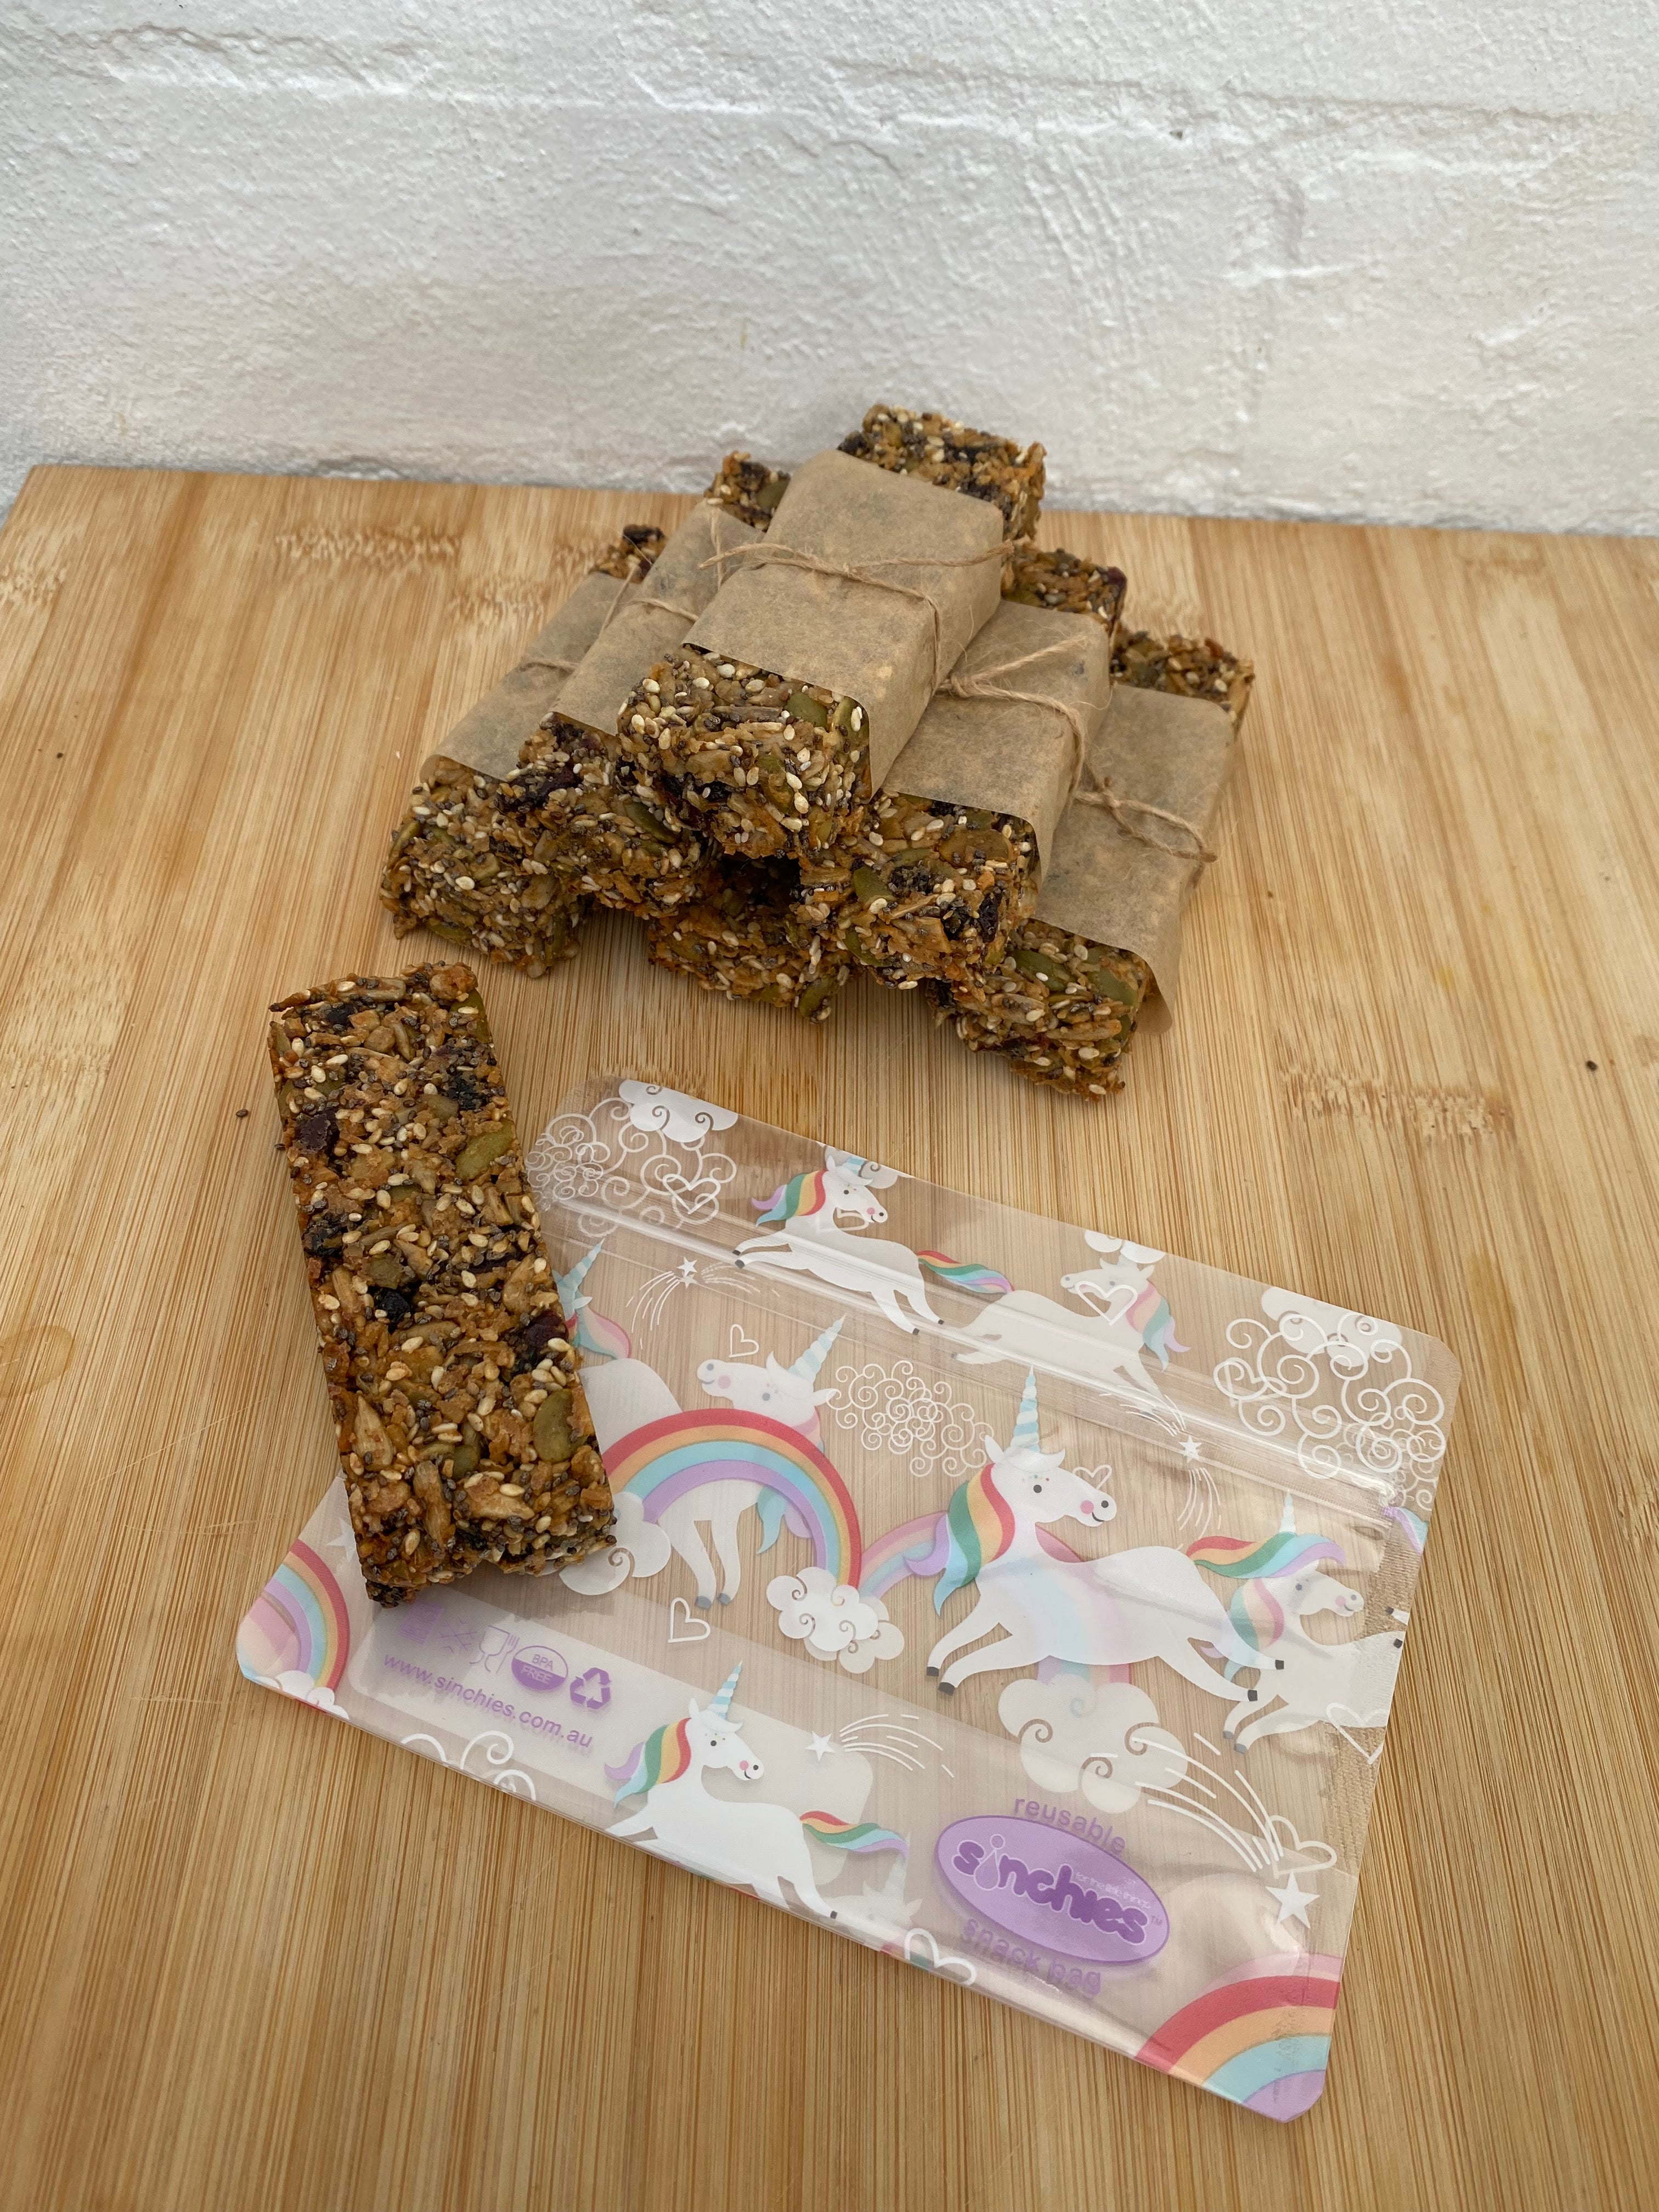 Seeded bars in sinchies reusable snack bag